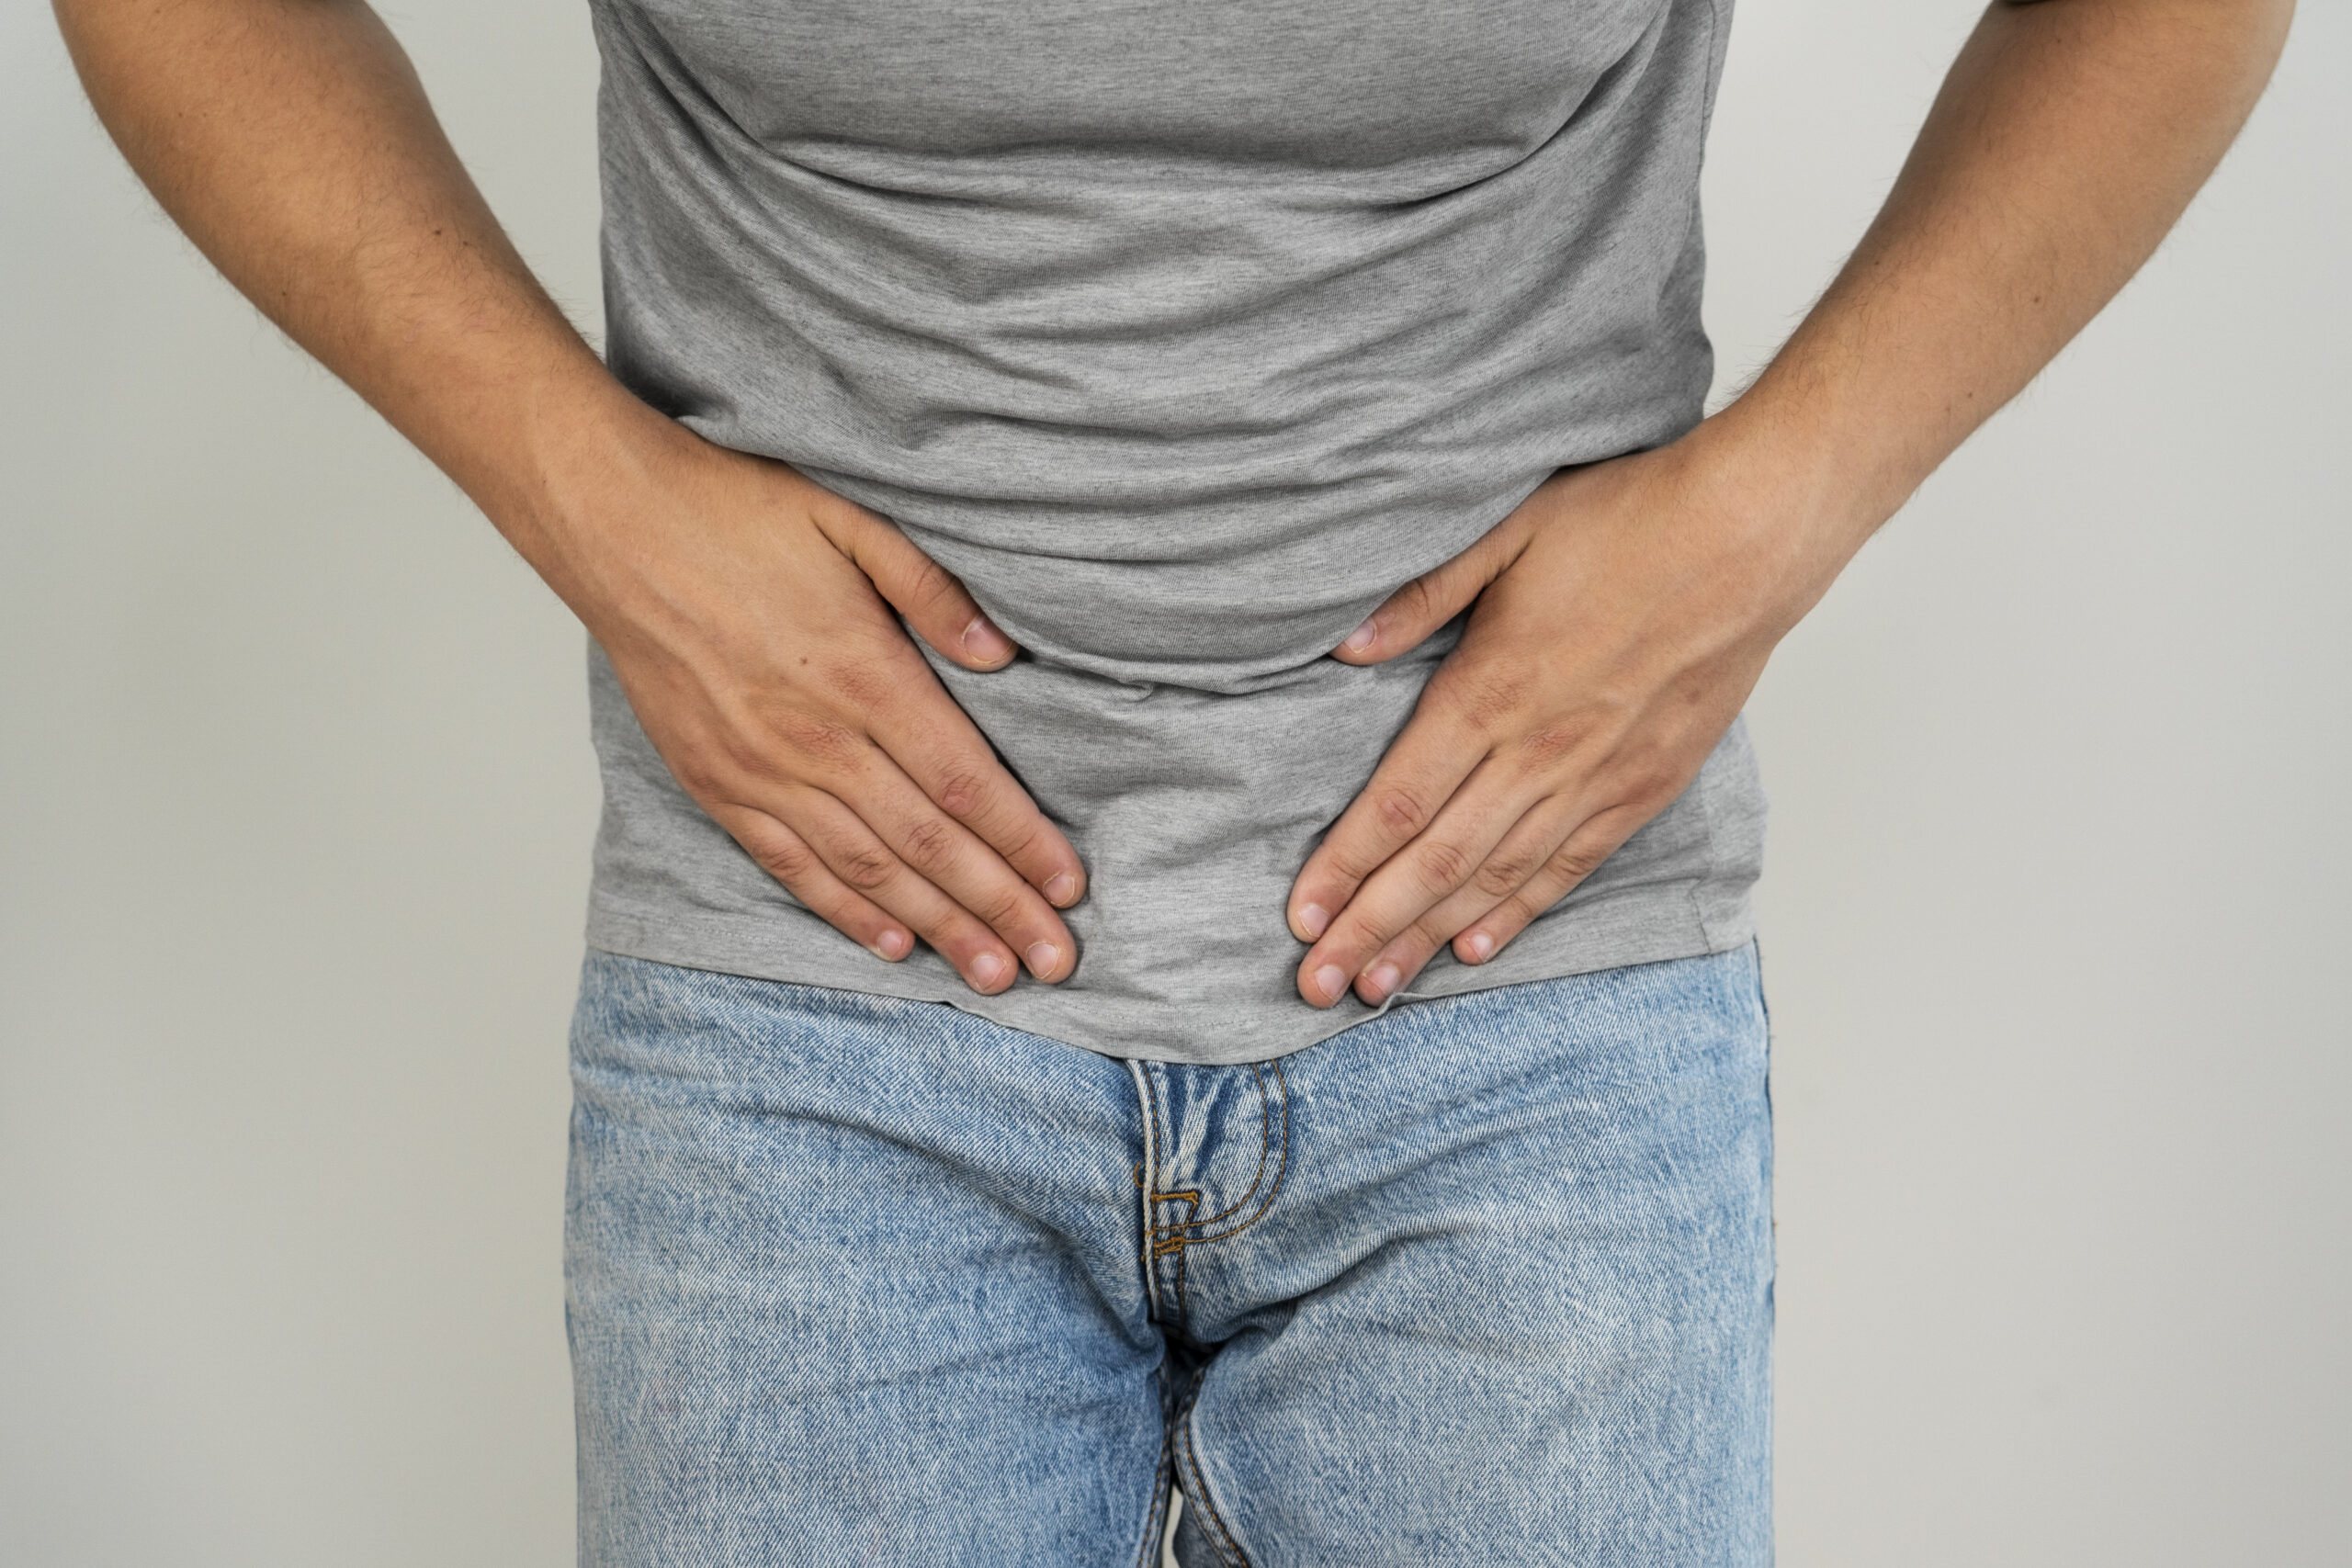 Bladder Infection: What Is, Causes, Symptoms, and Diagnosis